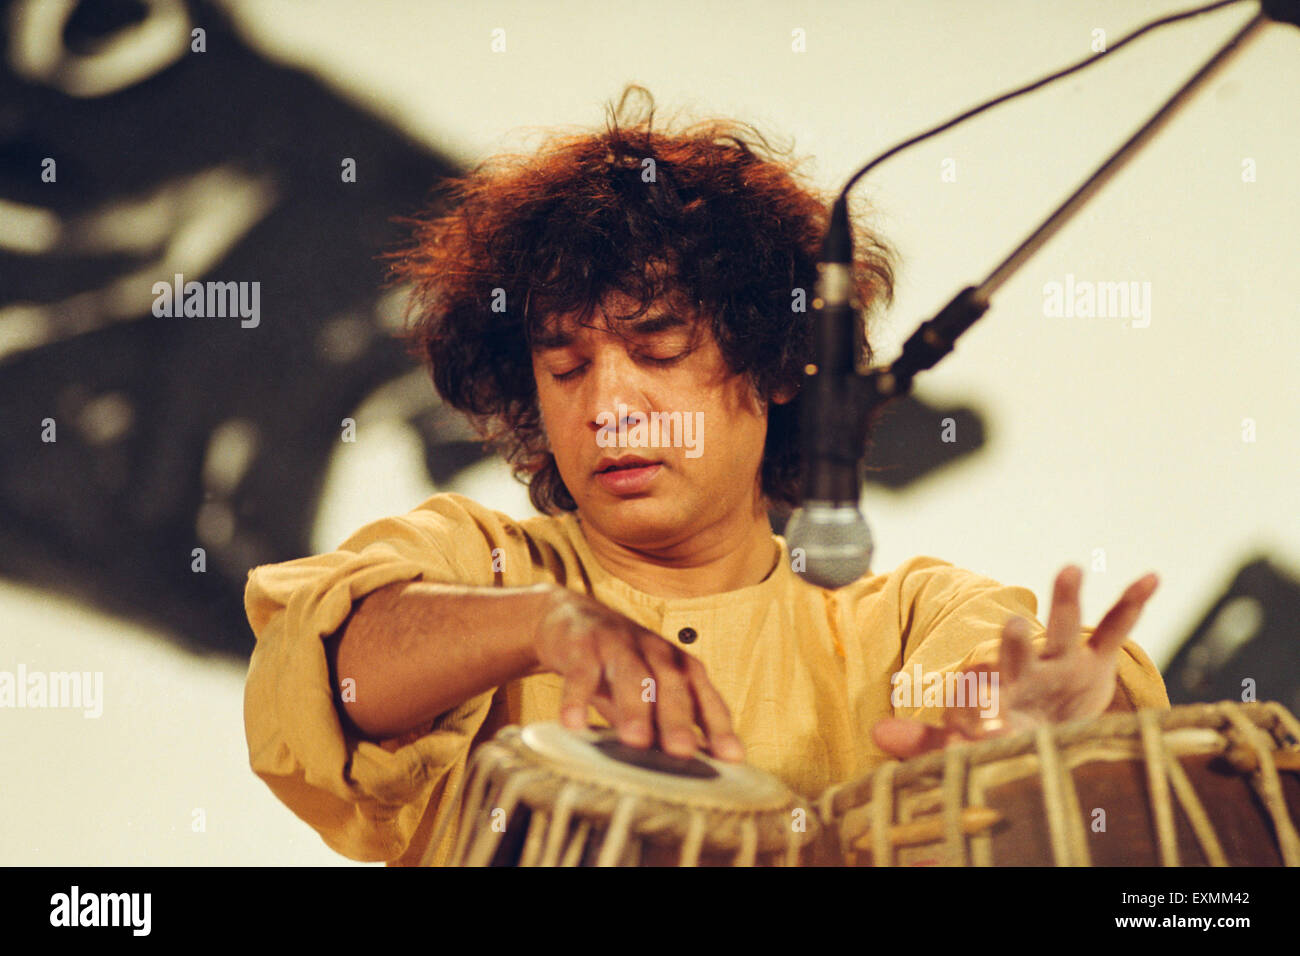 Zakir Hussain, Indian tabla player, composer, percussionist, music producer, film actor, India Stock Photo